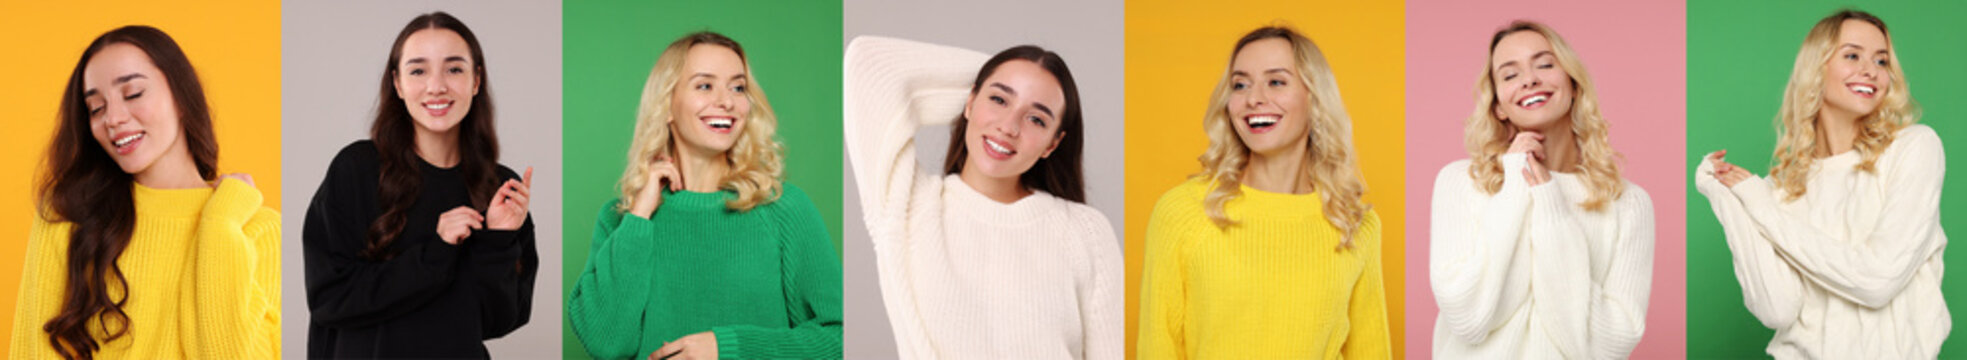 Happy women in warm sweaters on color backgrounds, set of photos